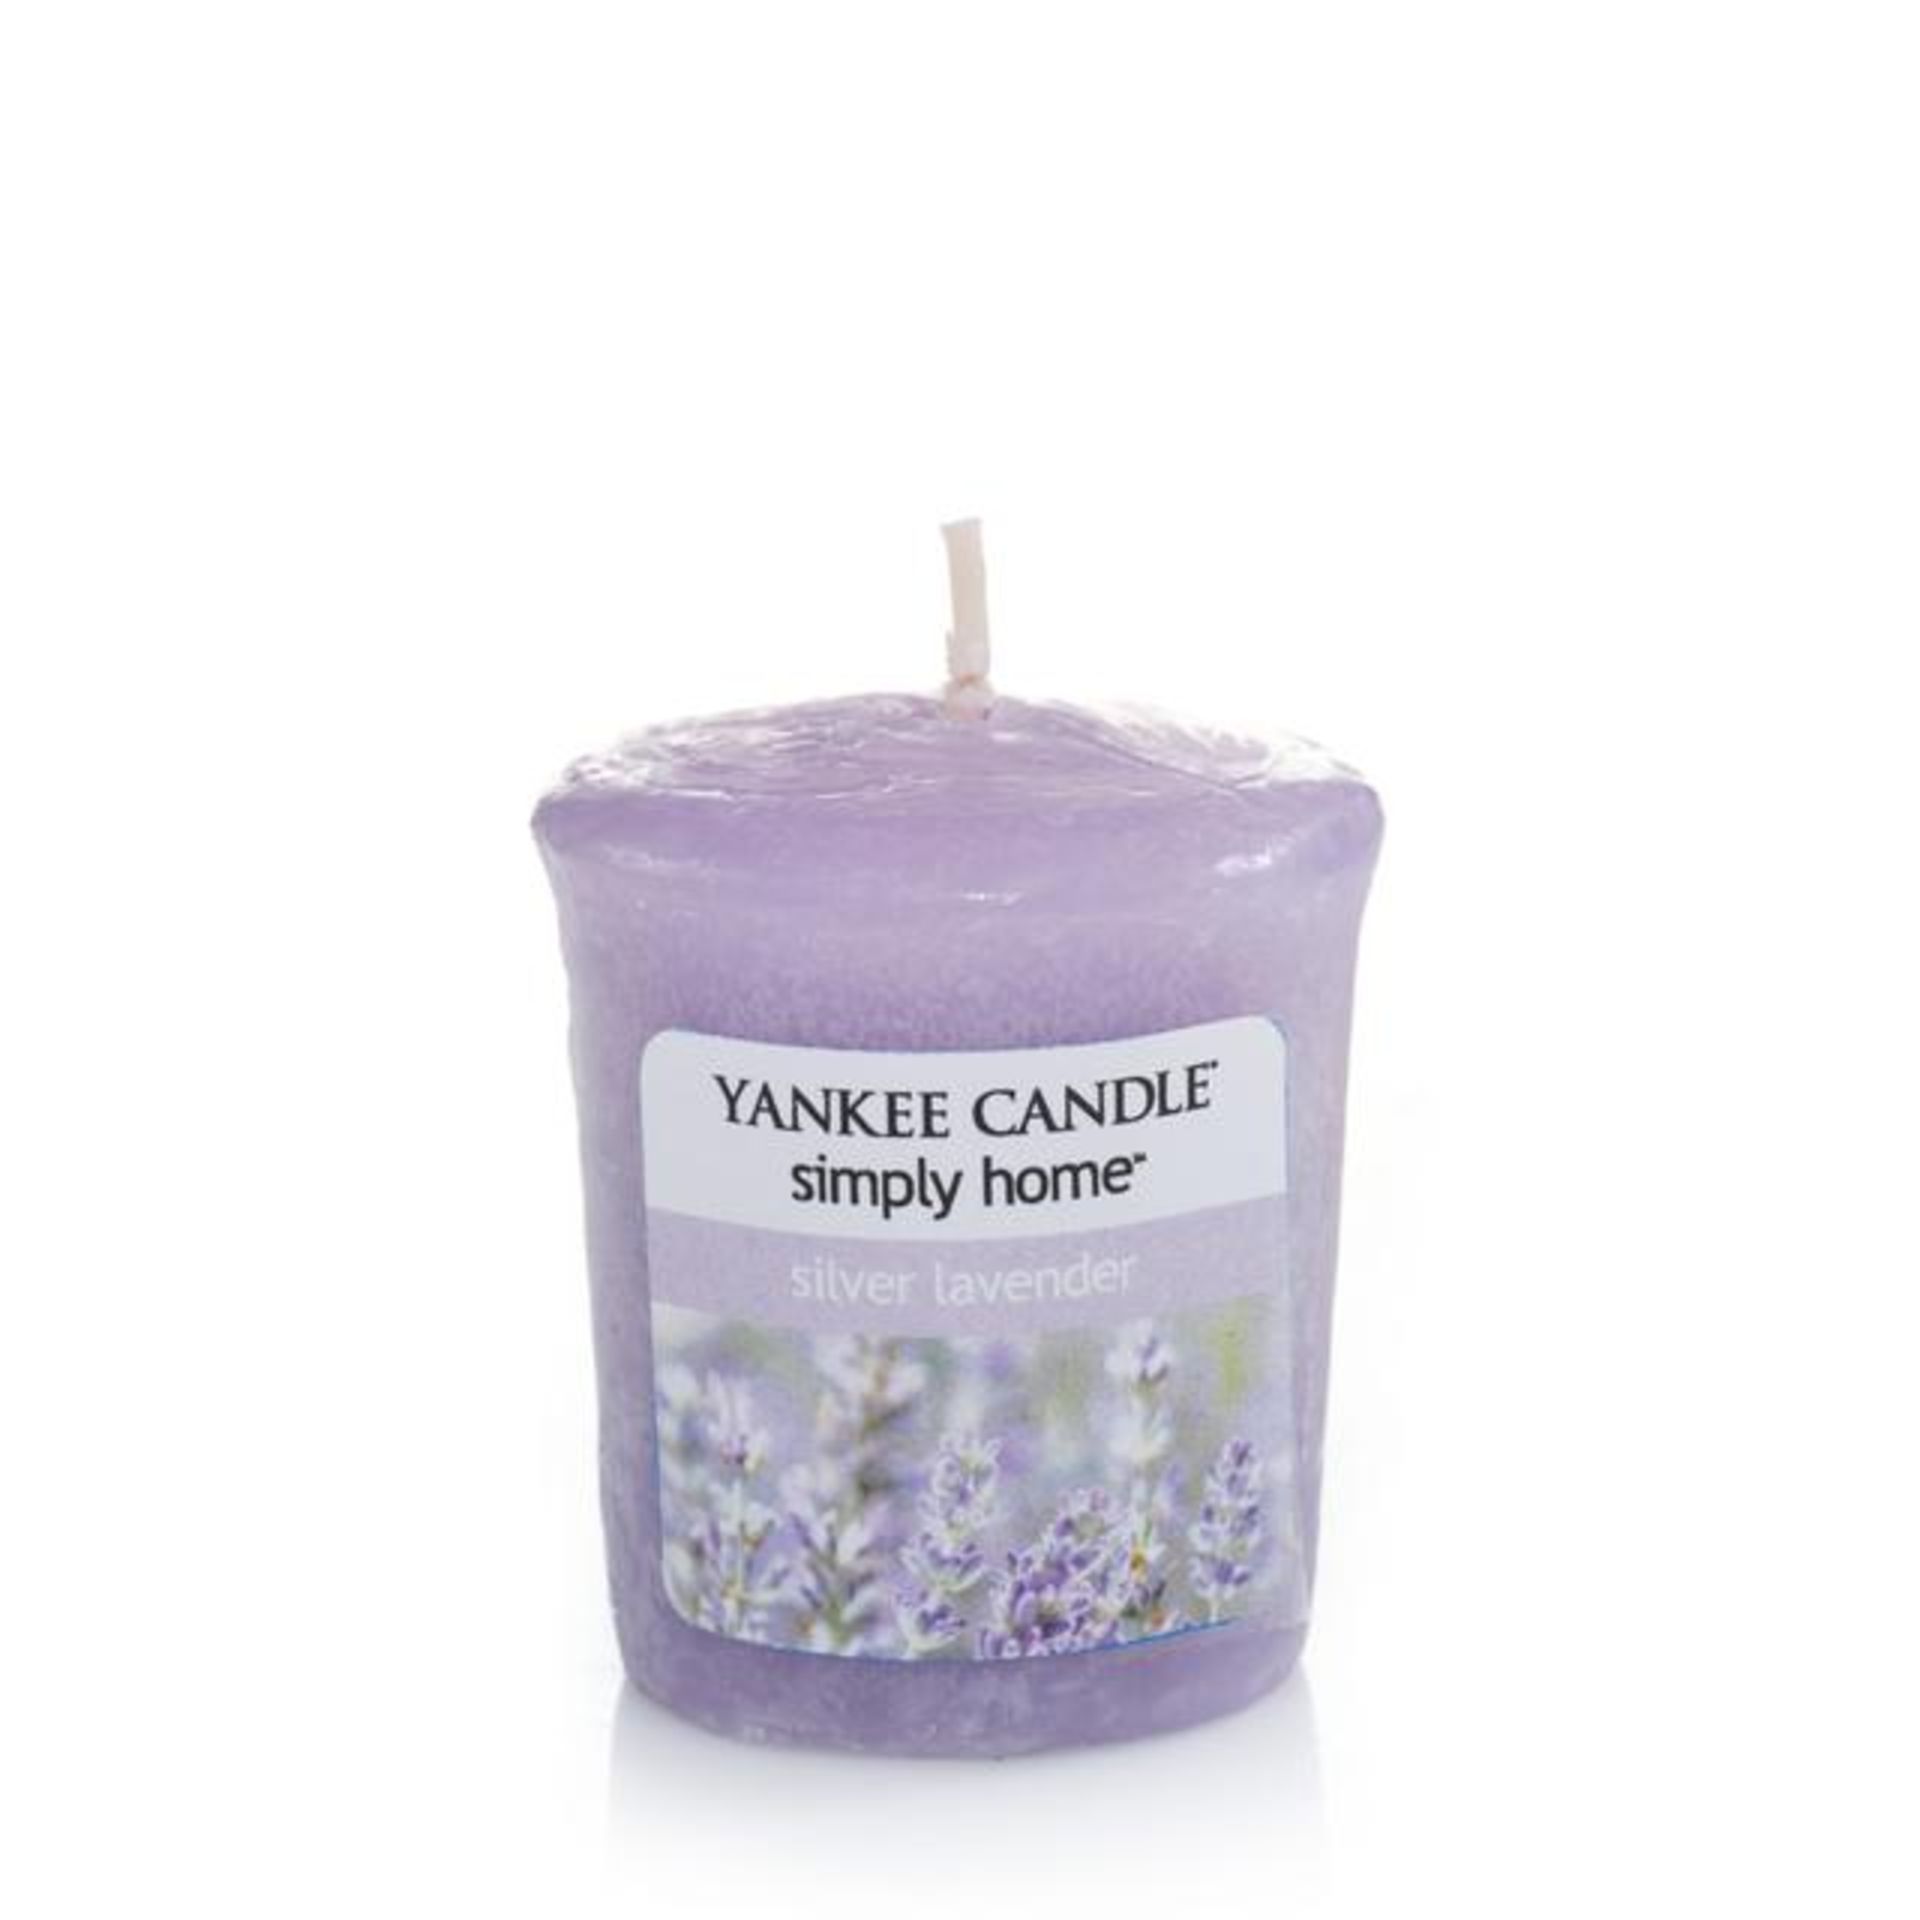 V Brand New 18 x Yankee Candle Votive Silver Lavender 49g Total Amazon Price £71.82 - Image 2 of 2